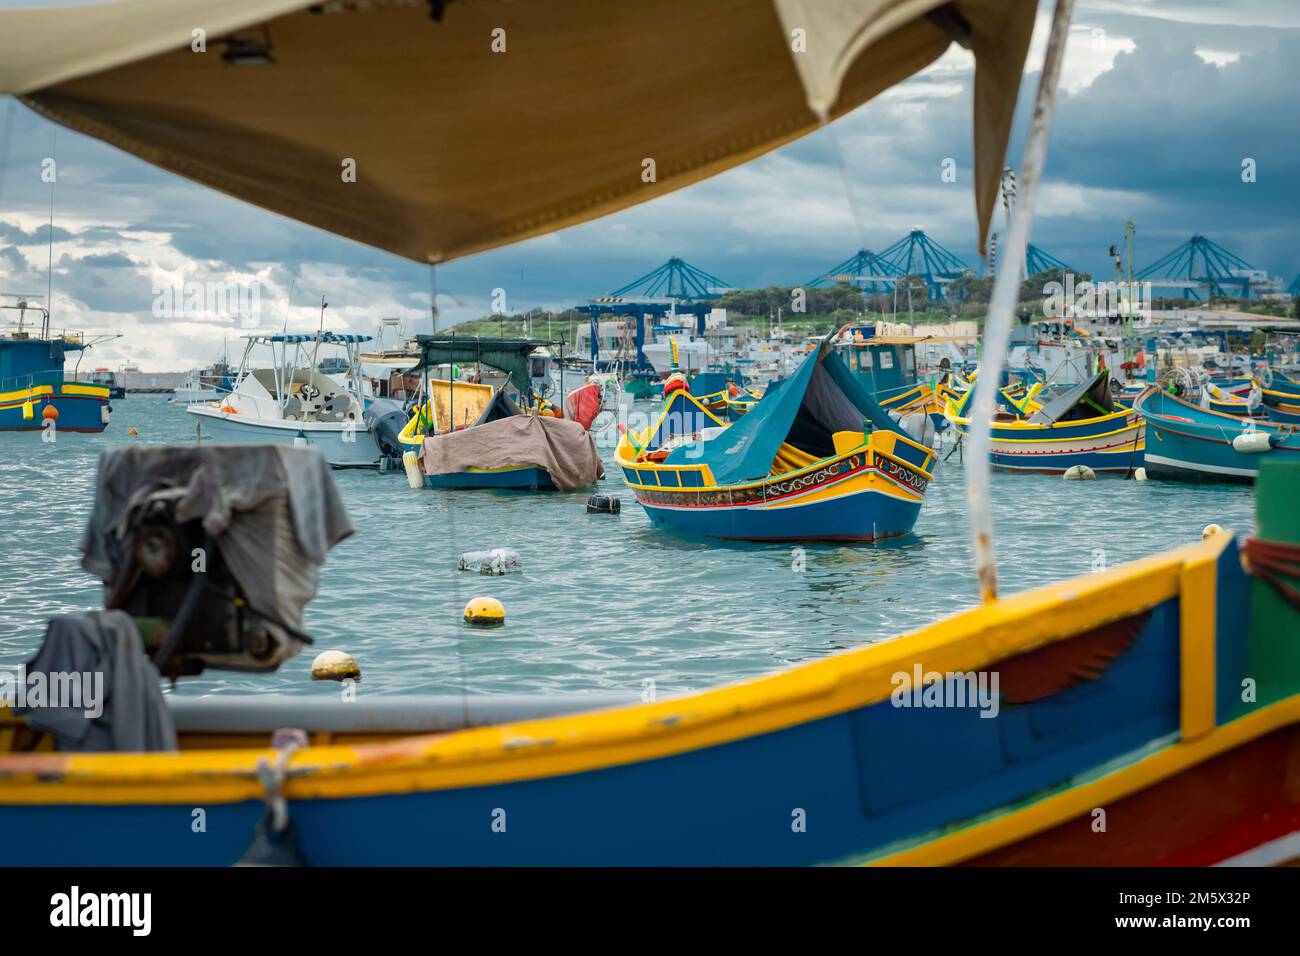 Luzzu, typical fishing boats of Malta moored in the marina of Marsaxlokk on an autumn day. Many ships in the bay, container cranes in the background. Stock Photo